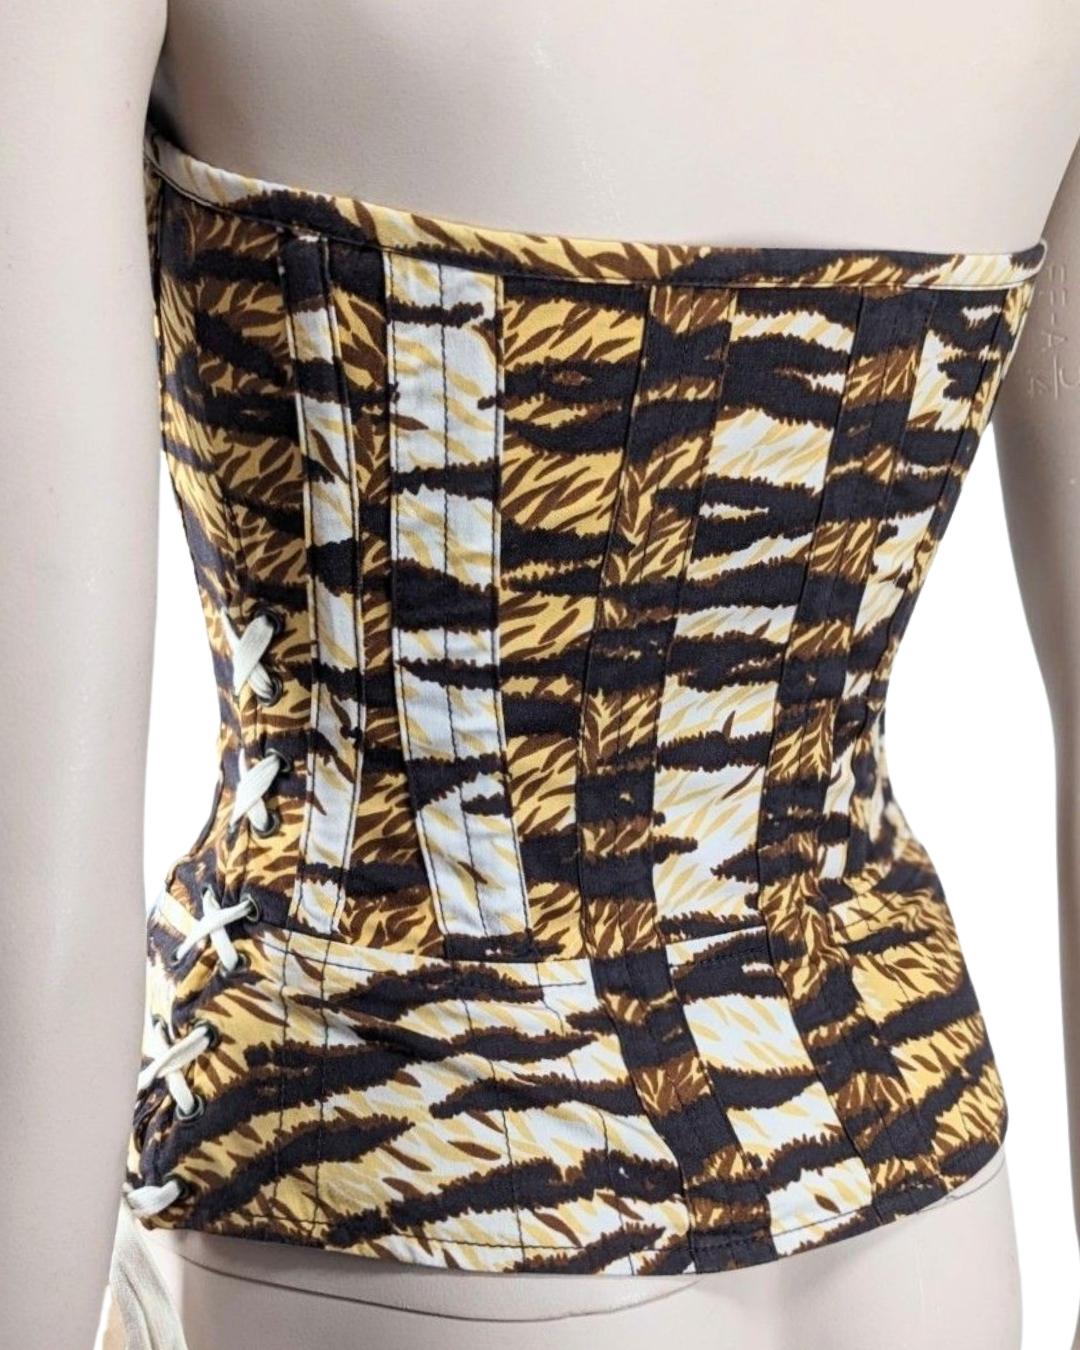 D&G by Dolce & Gabbana Animal Print Bustier For Sale 7